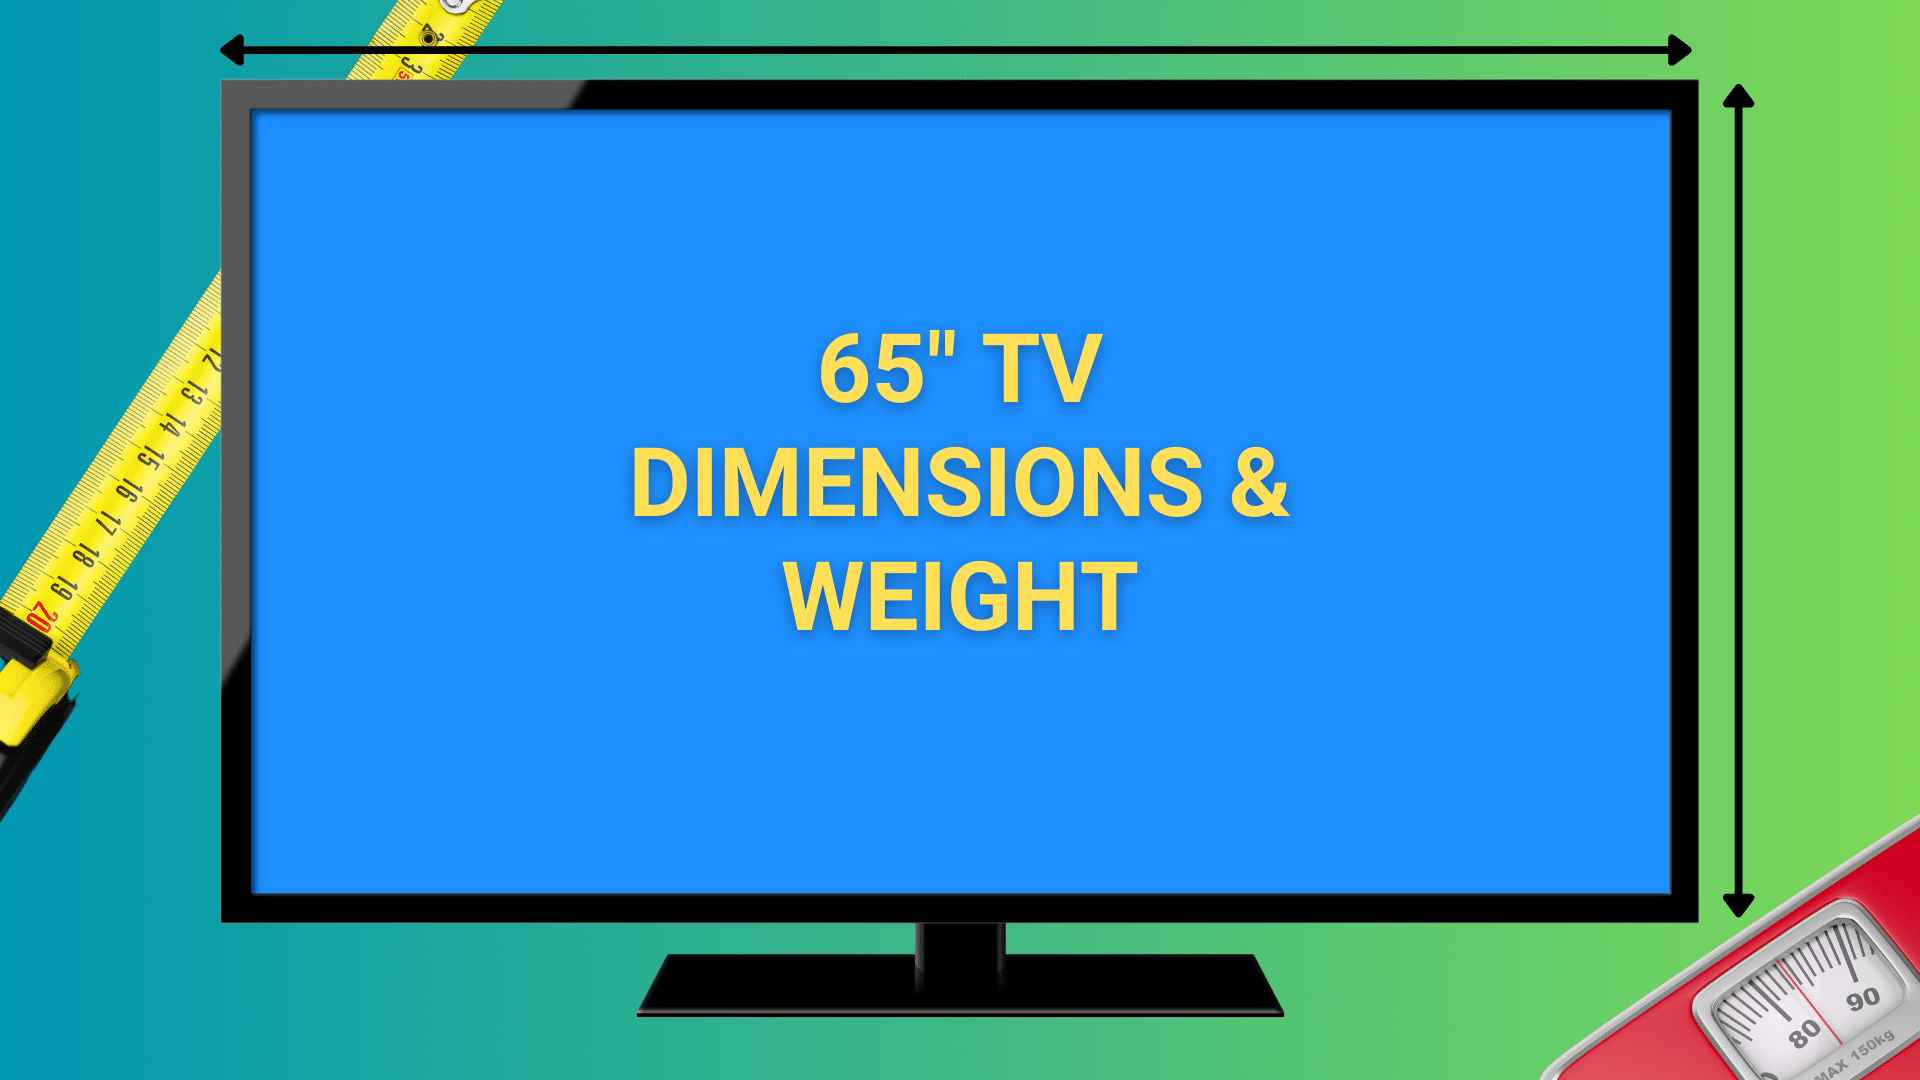 Graphic of 65 inch TV with measuring tape and bath scale in background.